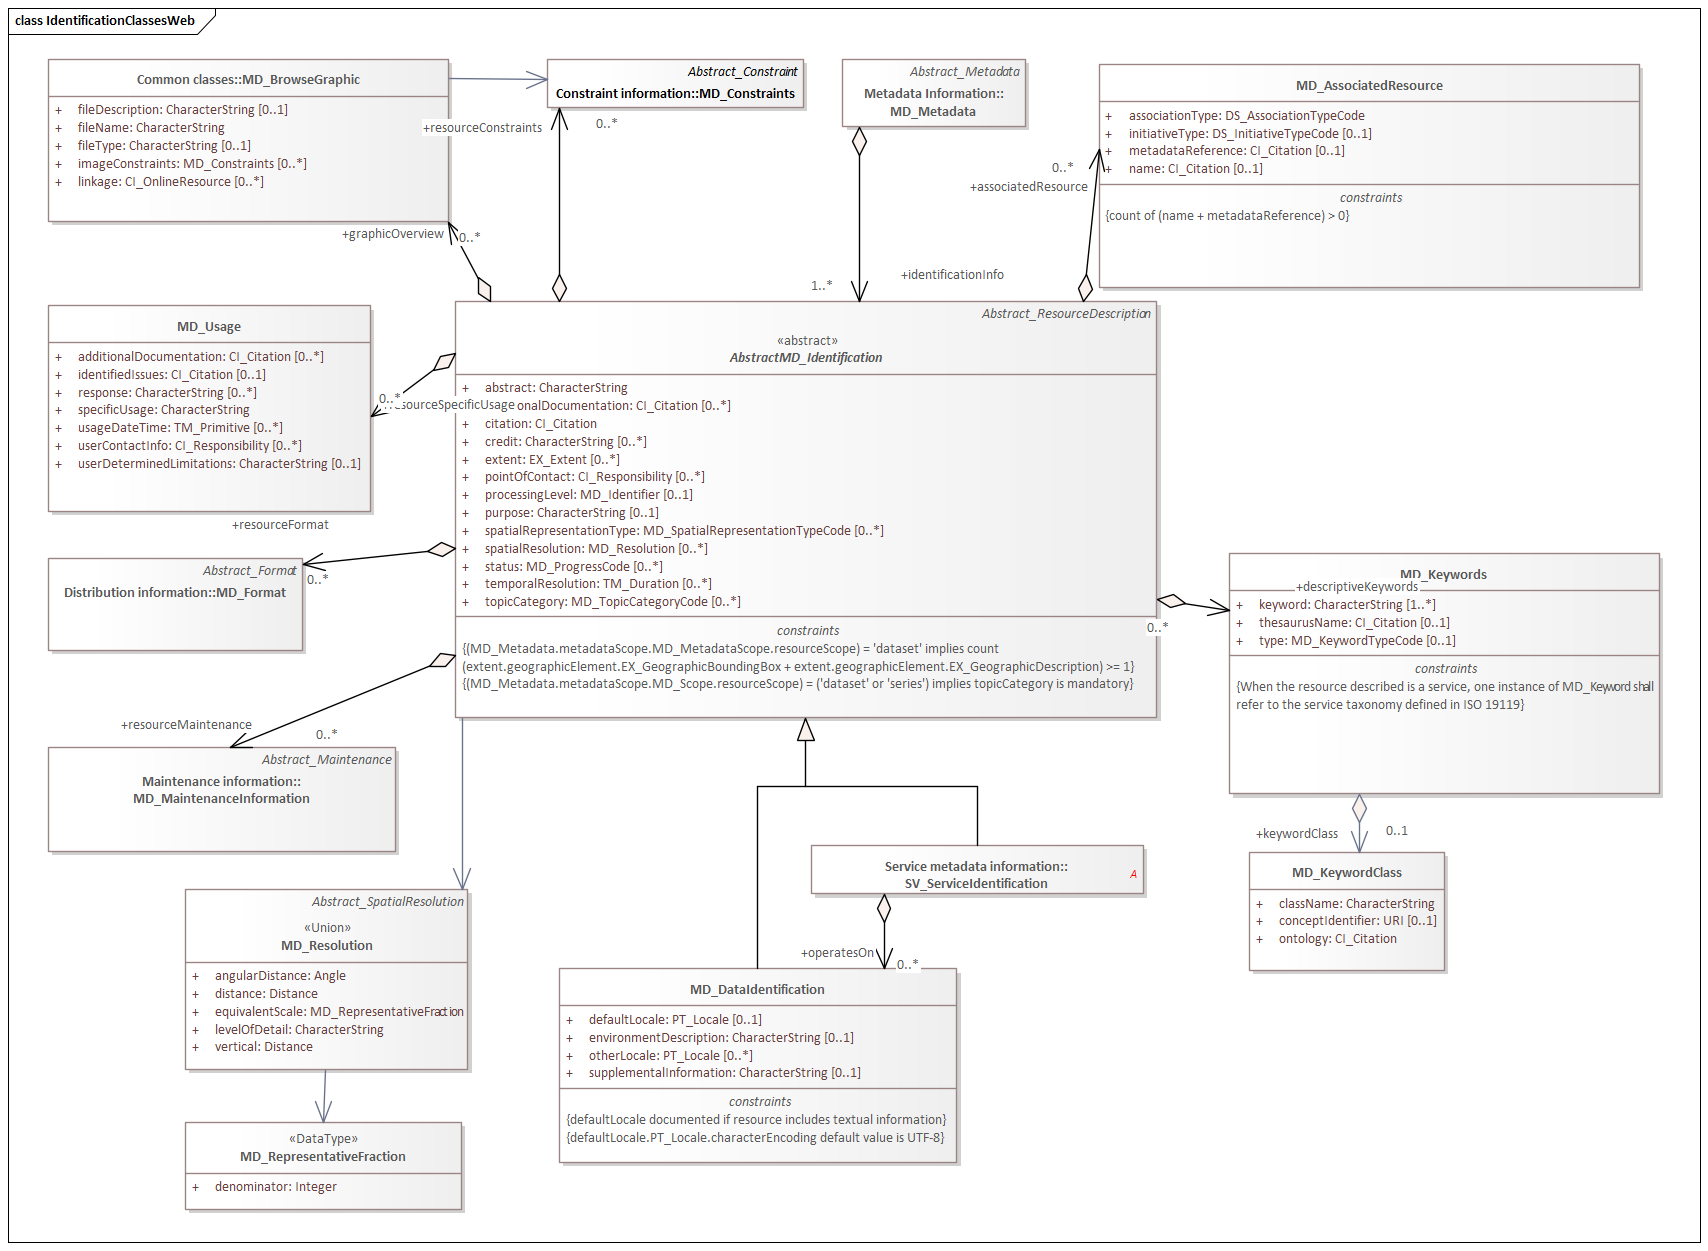 Thumbnail of Metadata for Resource Identification UML and attributes